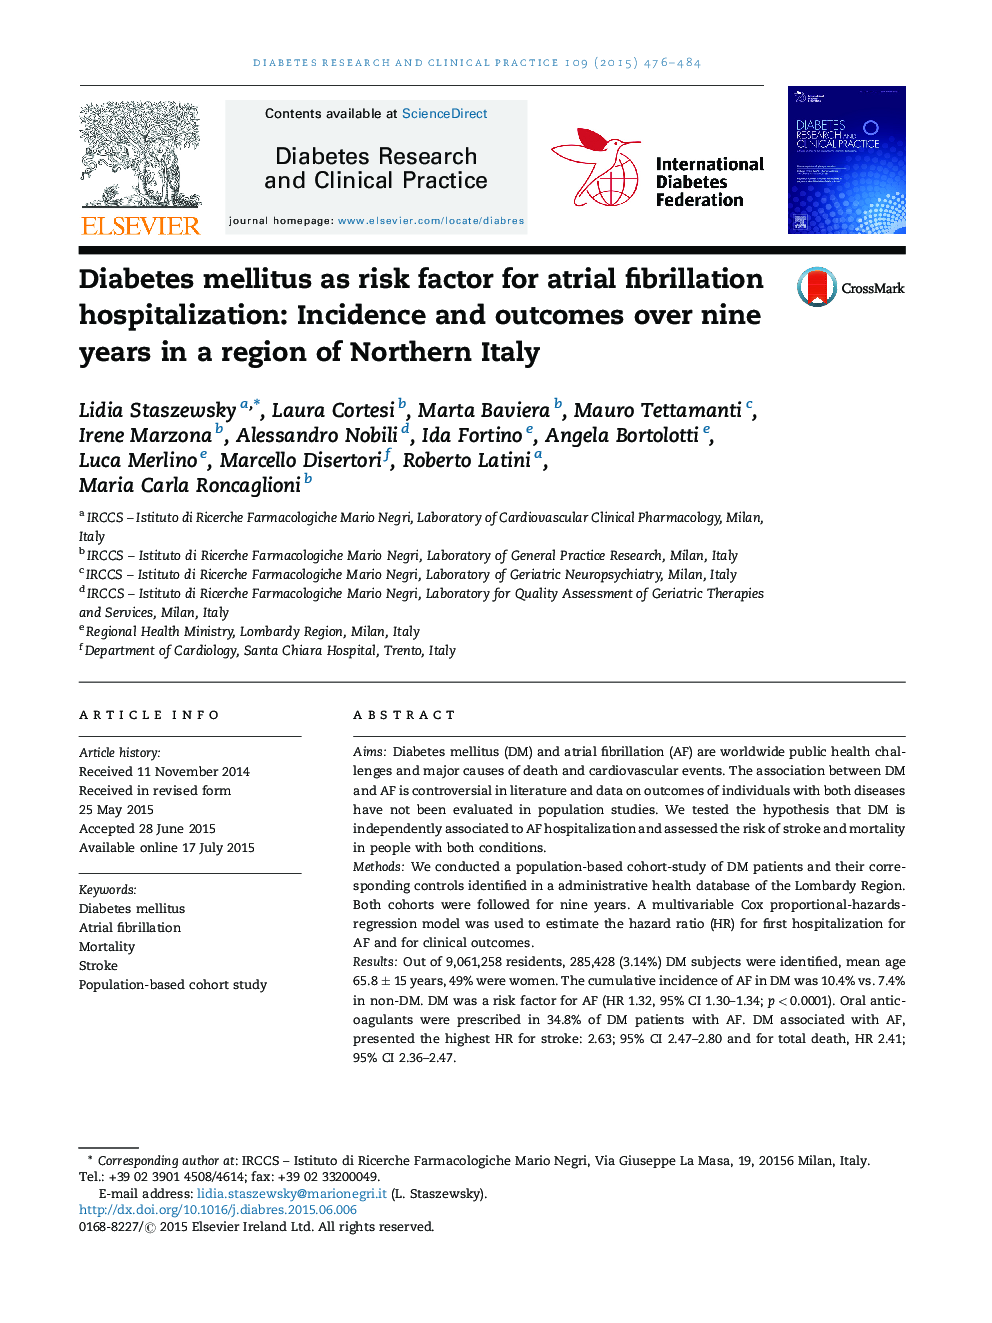 Diabetes mellitus as risk factor for atrial fibrillation hospitalization: Incidence and outcomes over nine years in a region of Northern Italy